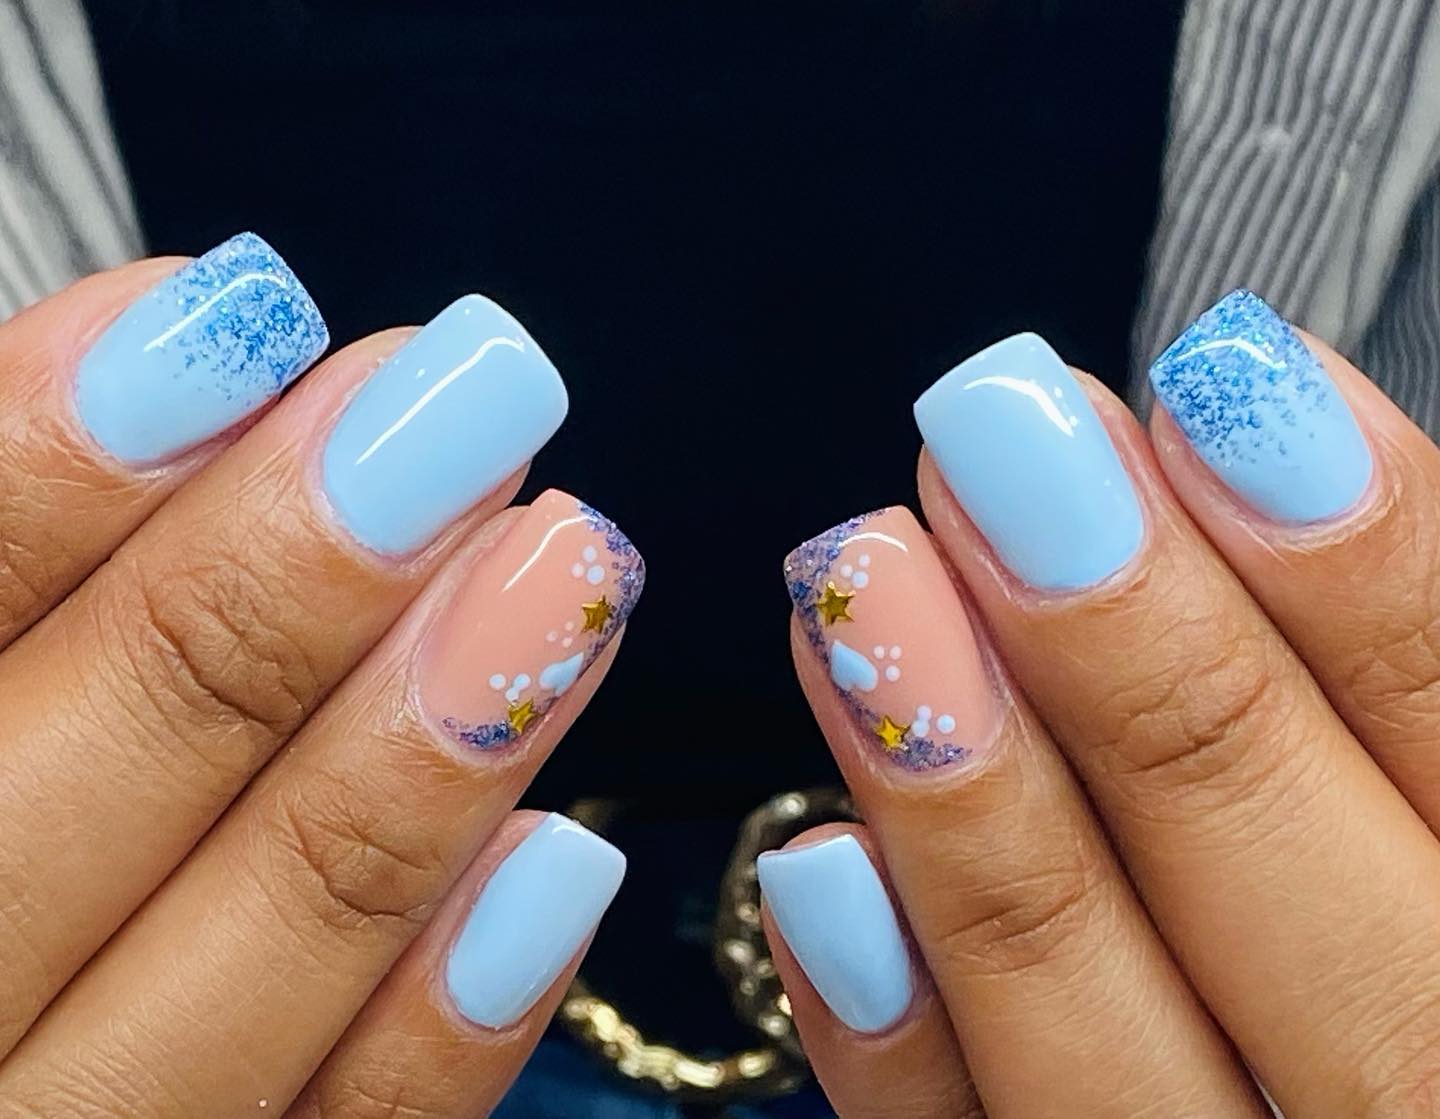 The perfect summertime manicure that you’ll enjoy due to its elegance and simplicity.